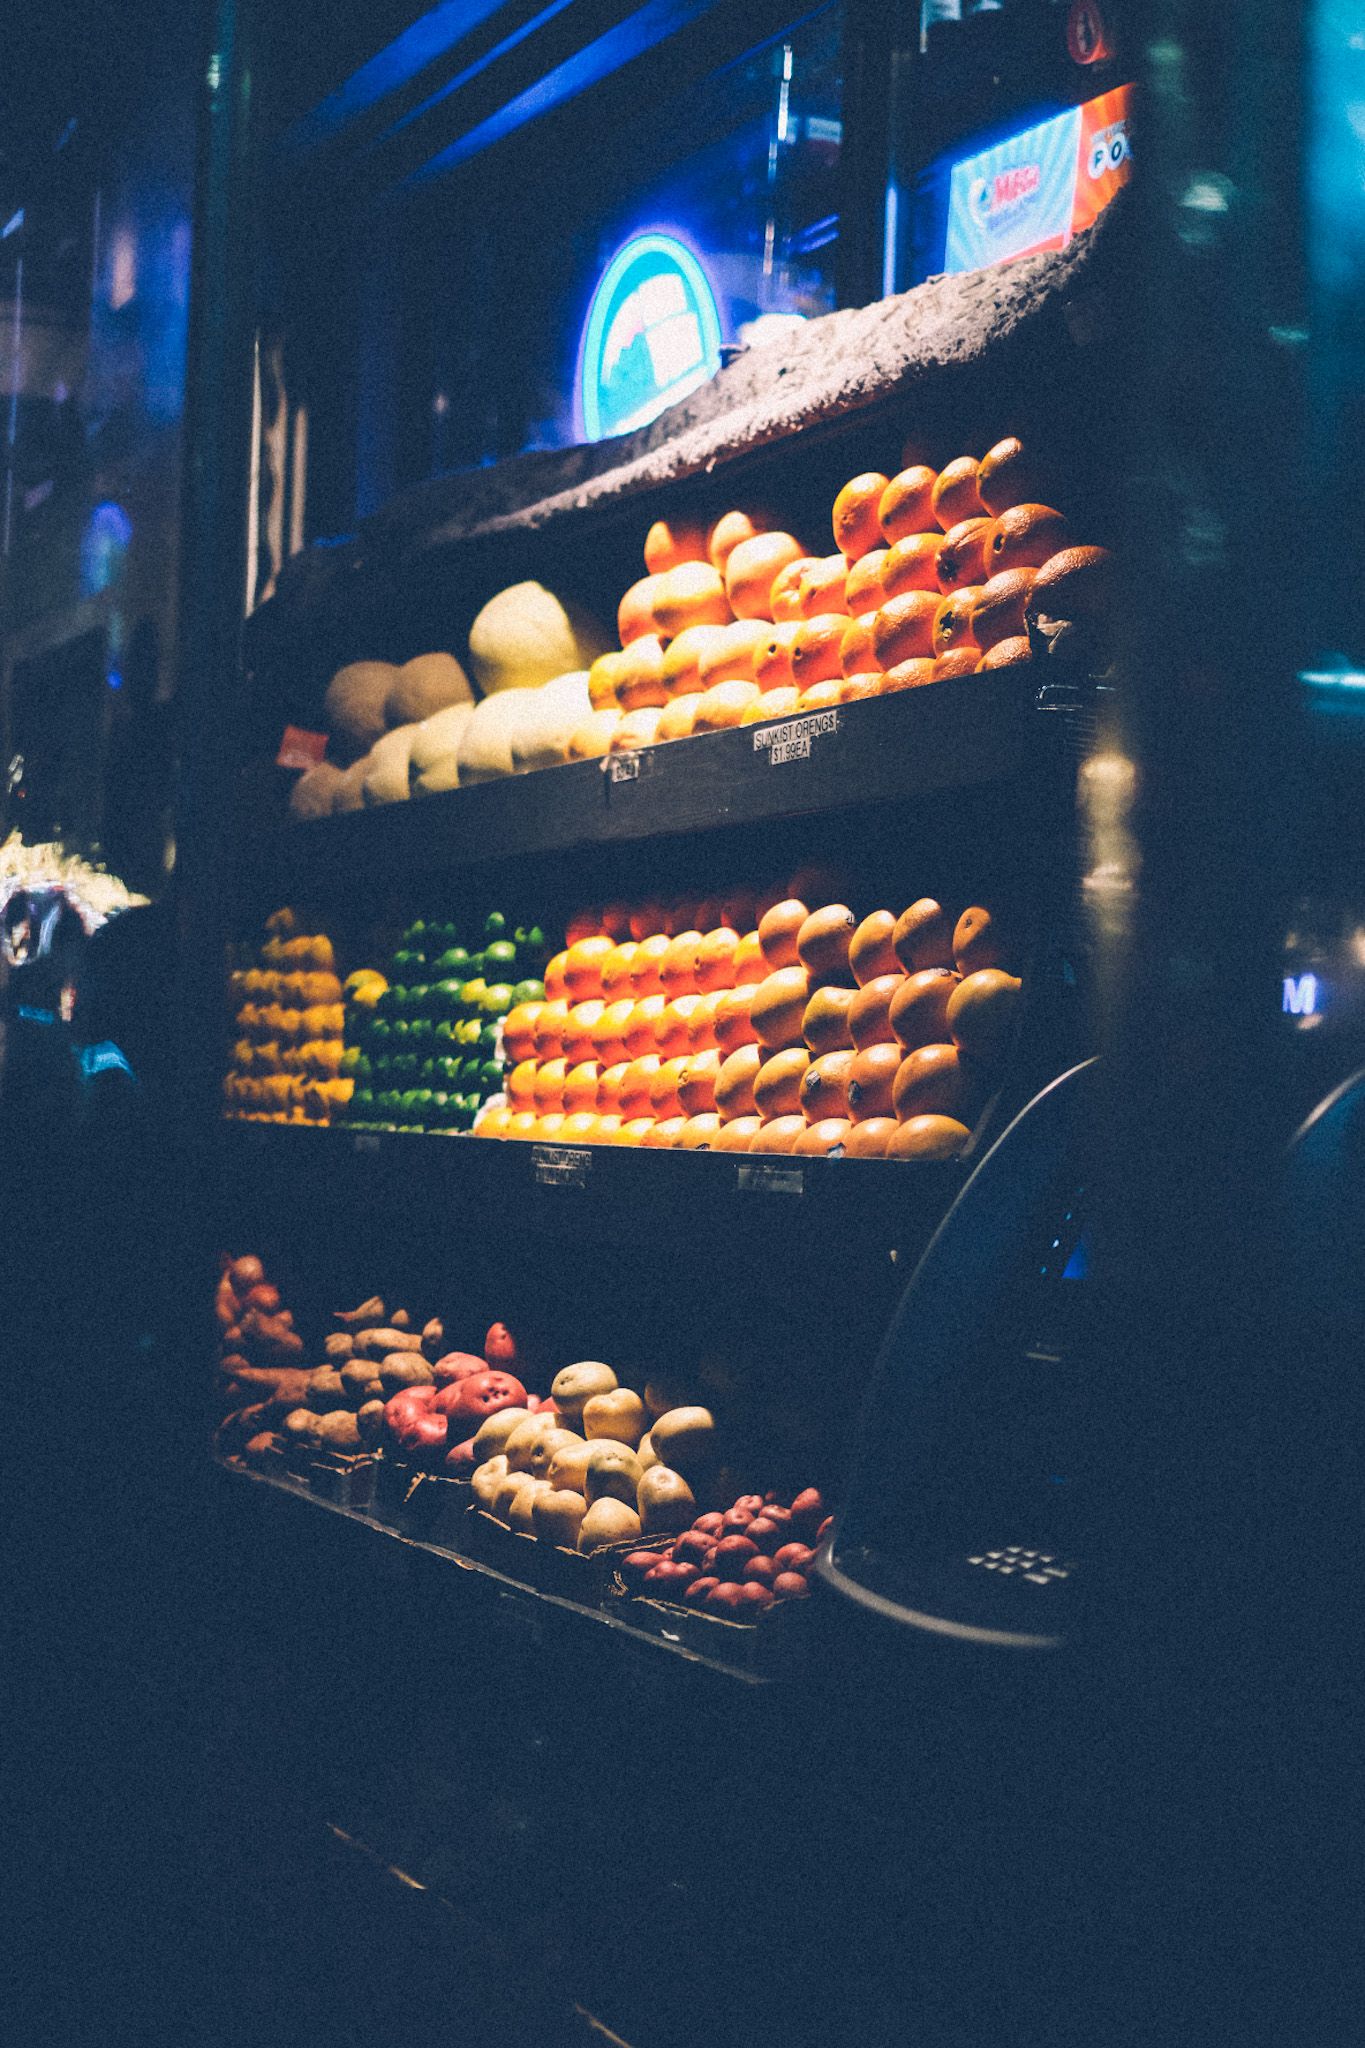 Stacks of citrus fruit sit on the shelves outside of a bodega, illuminated by one overhead light. It is evening.